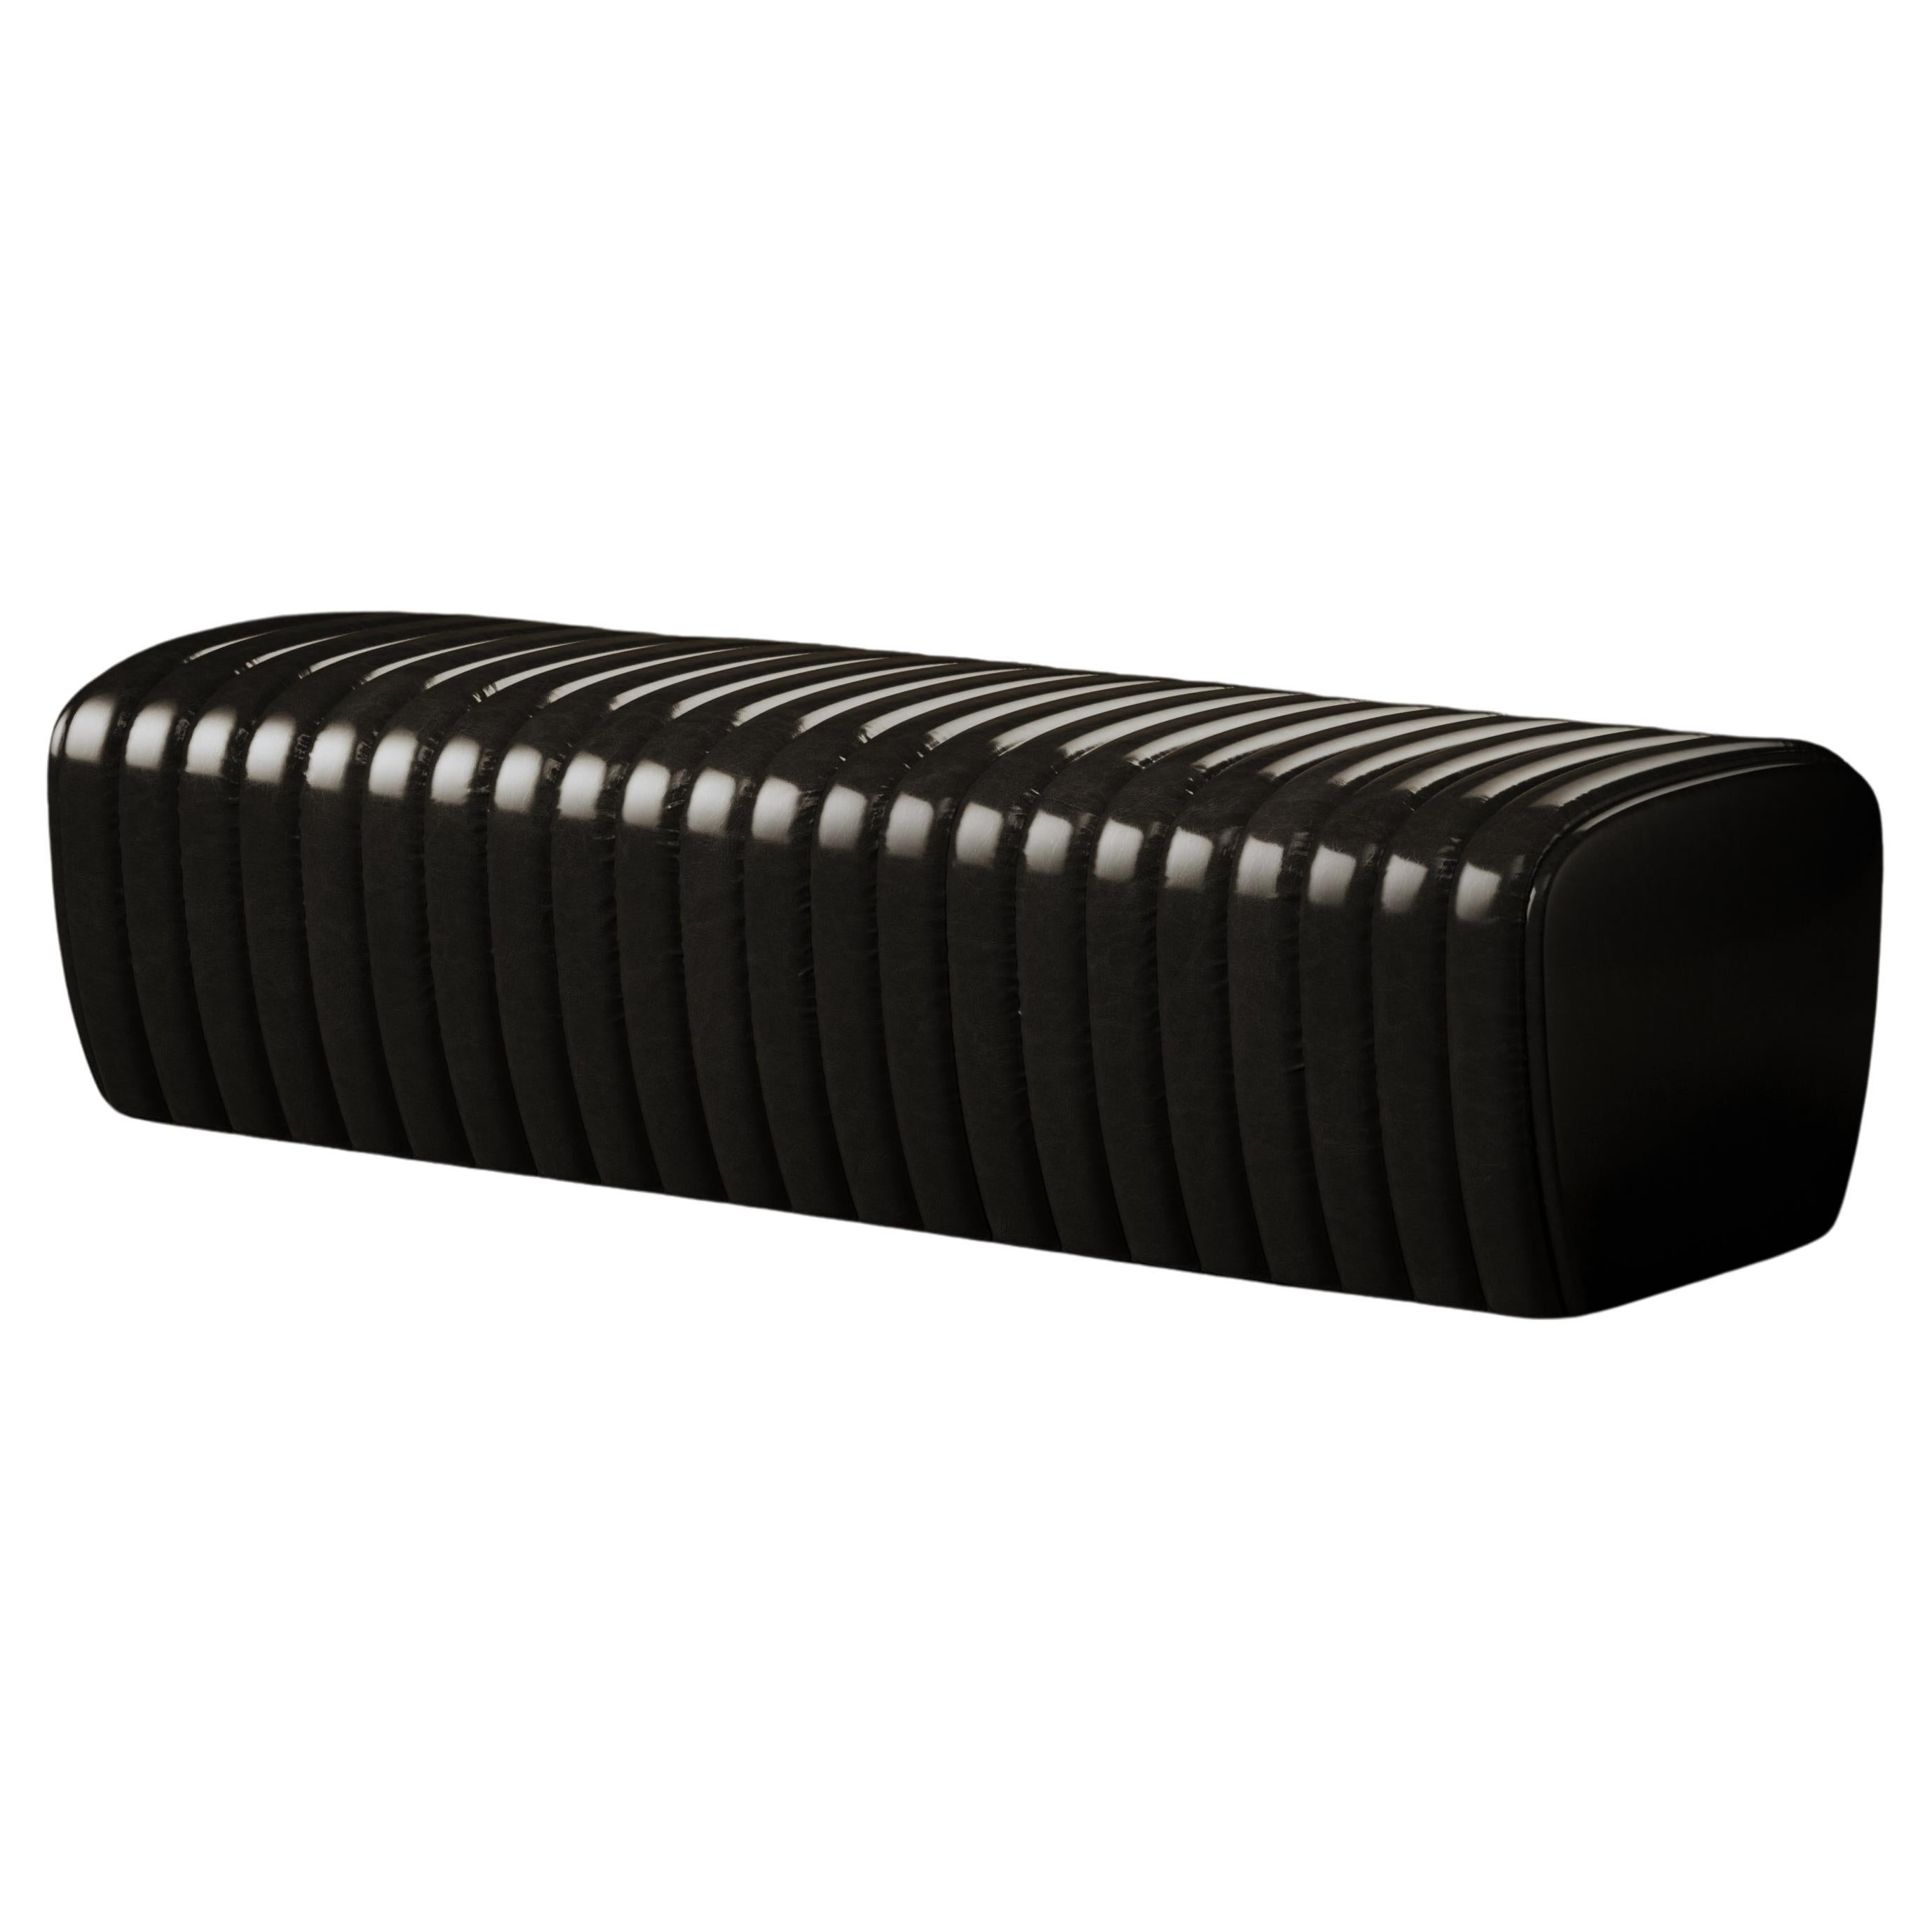 Petit Arret bench in black Shining leather - READY TO SHIP For Sale